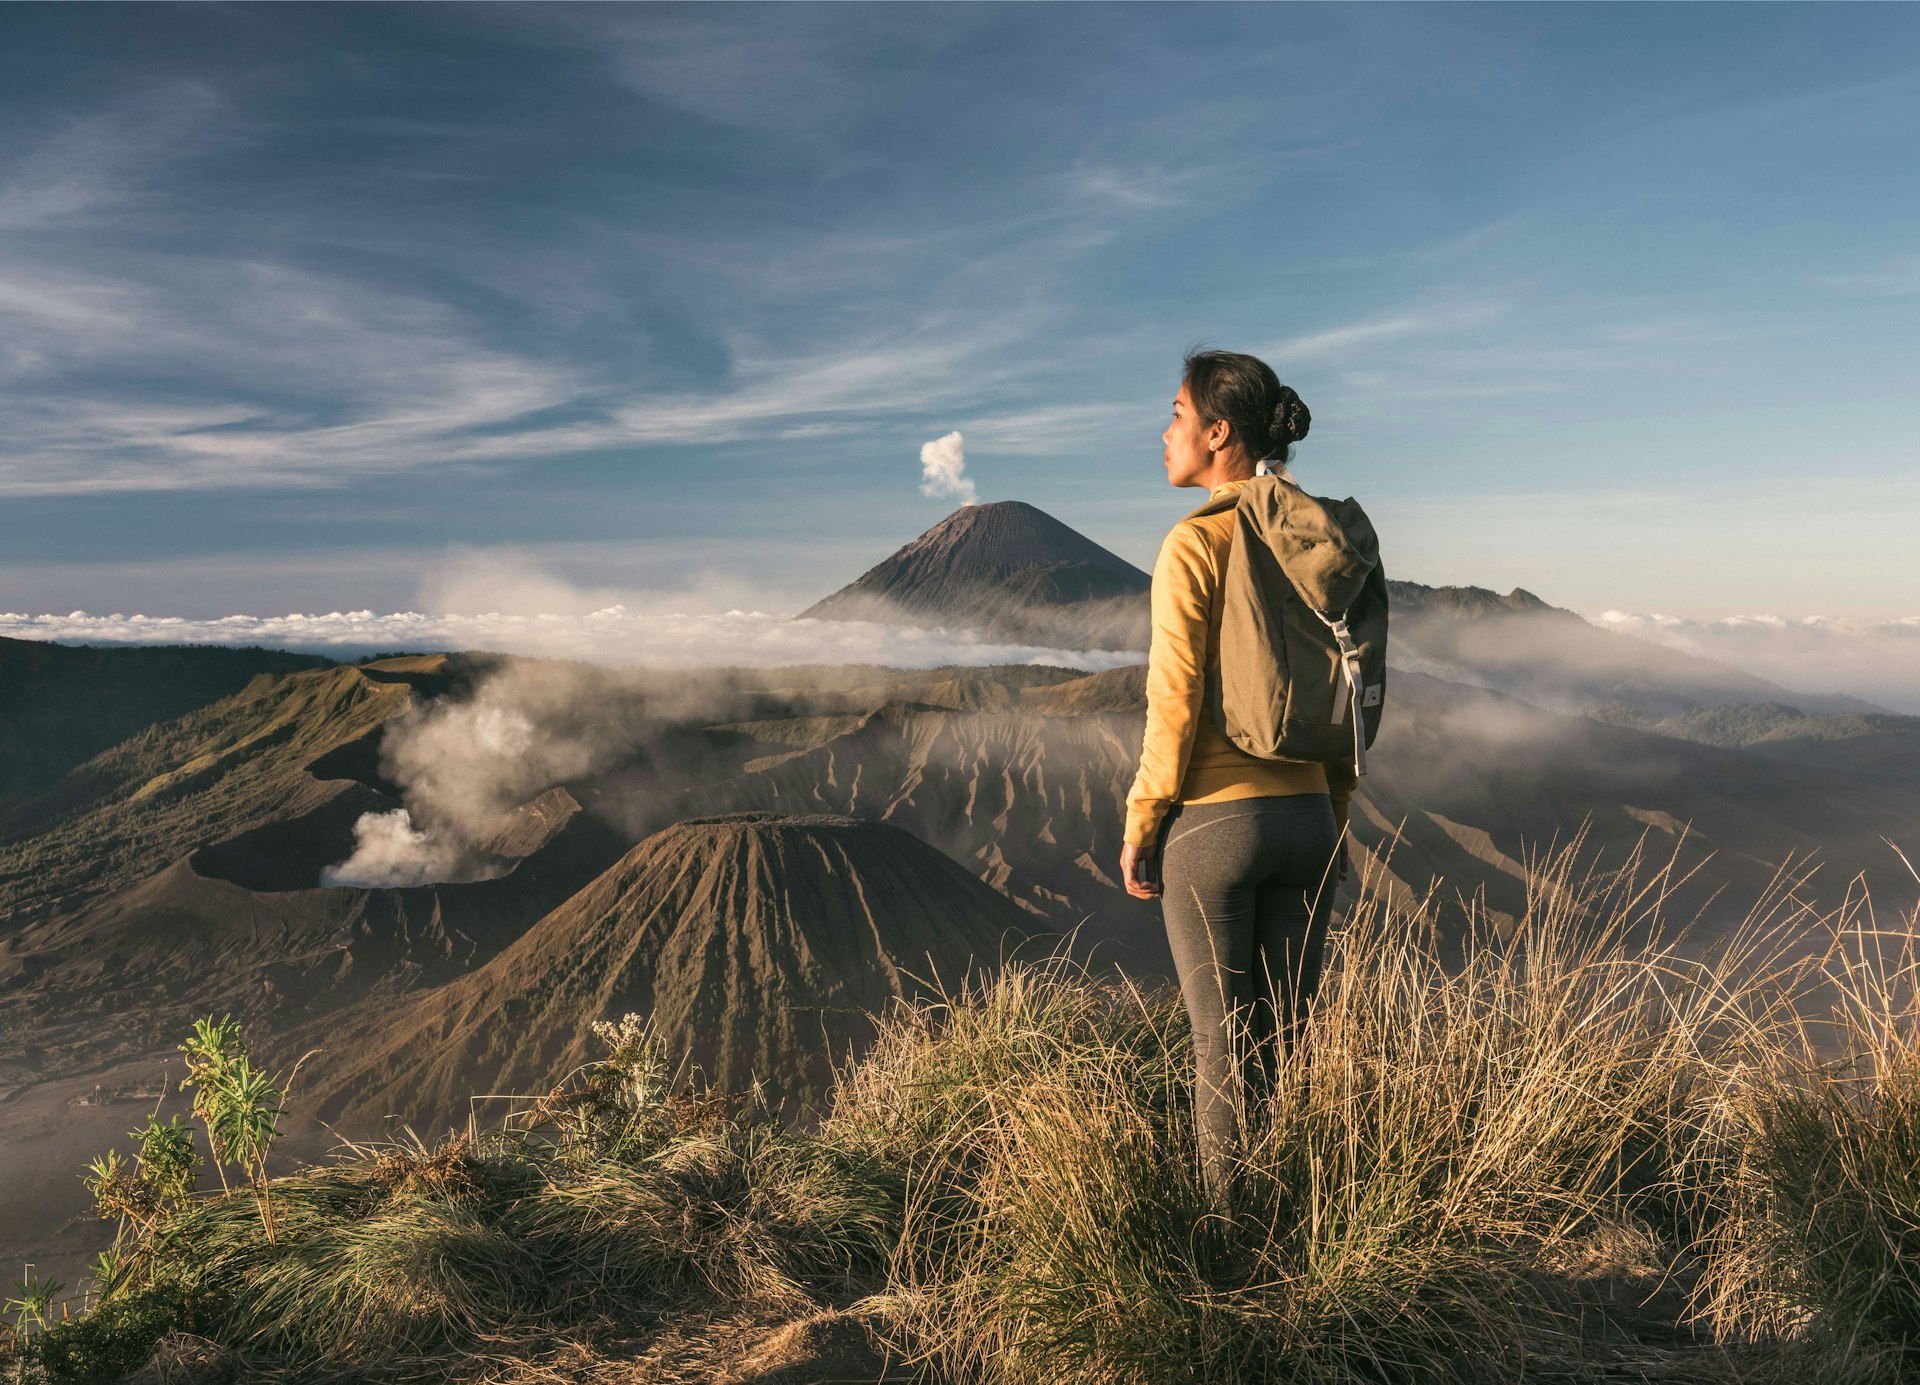 A female hiker near the summit of Mt Bromo, Indonesia